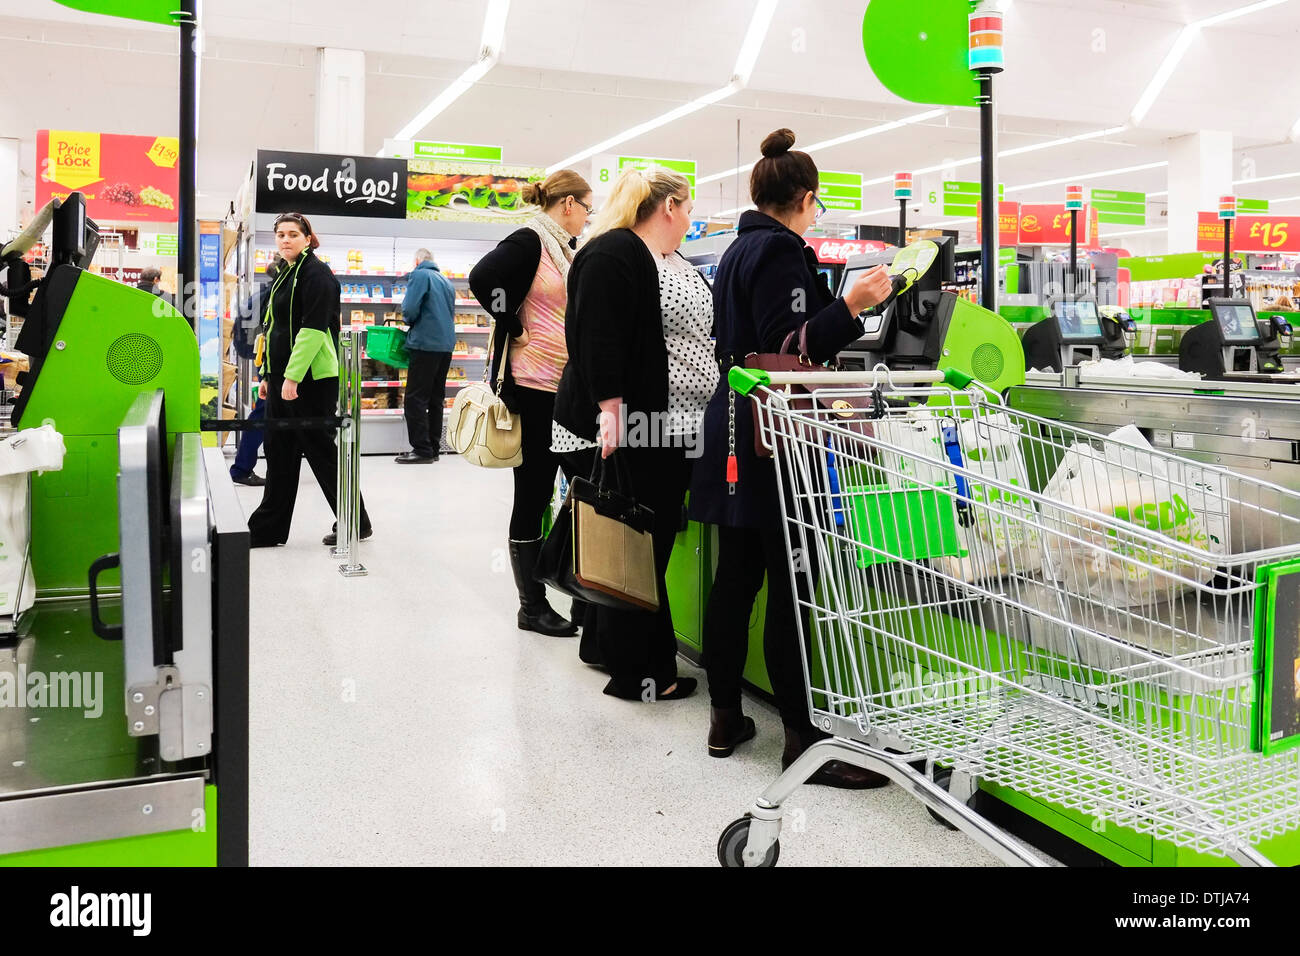 Customers queuing to pay at a self service till in an Asda supermarket. Stock Photo